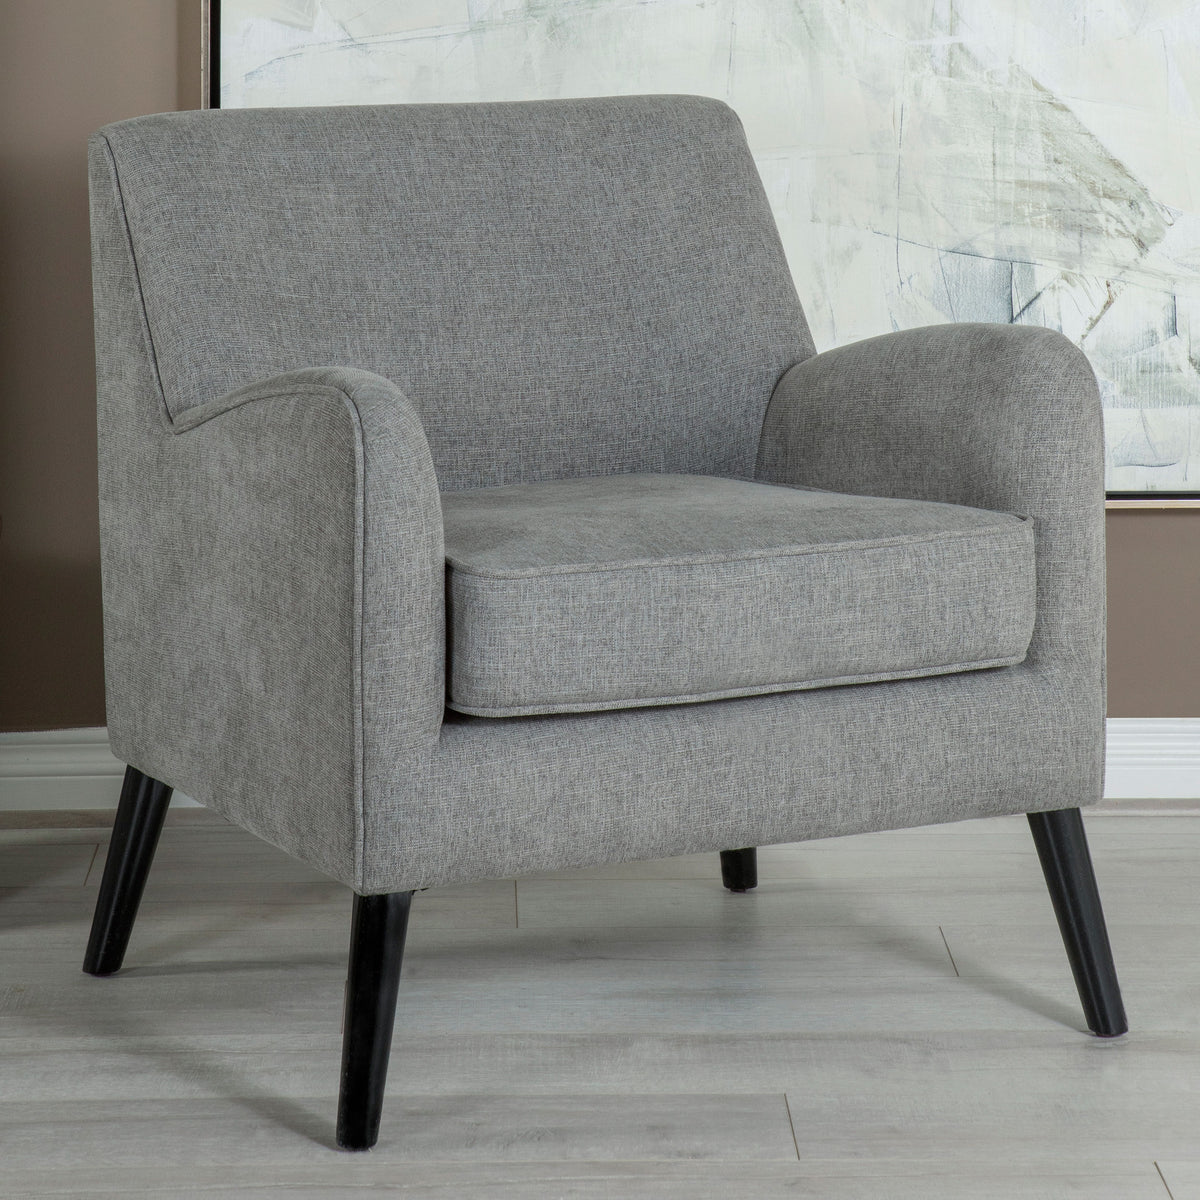 Charlie Upholstered Accent Chair with Reversible Seat Cushion  Half Price Furniture